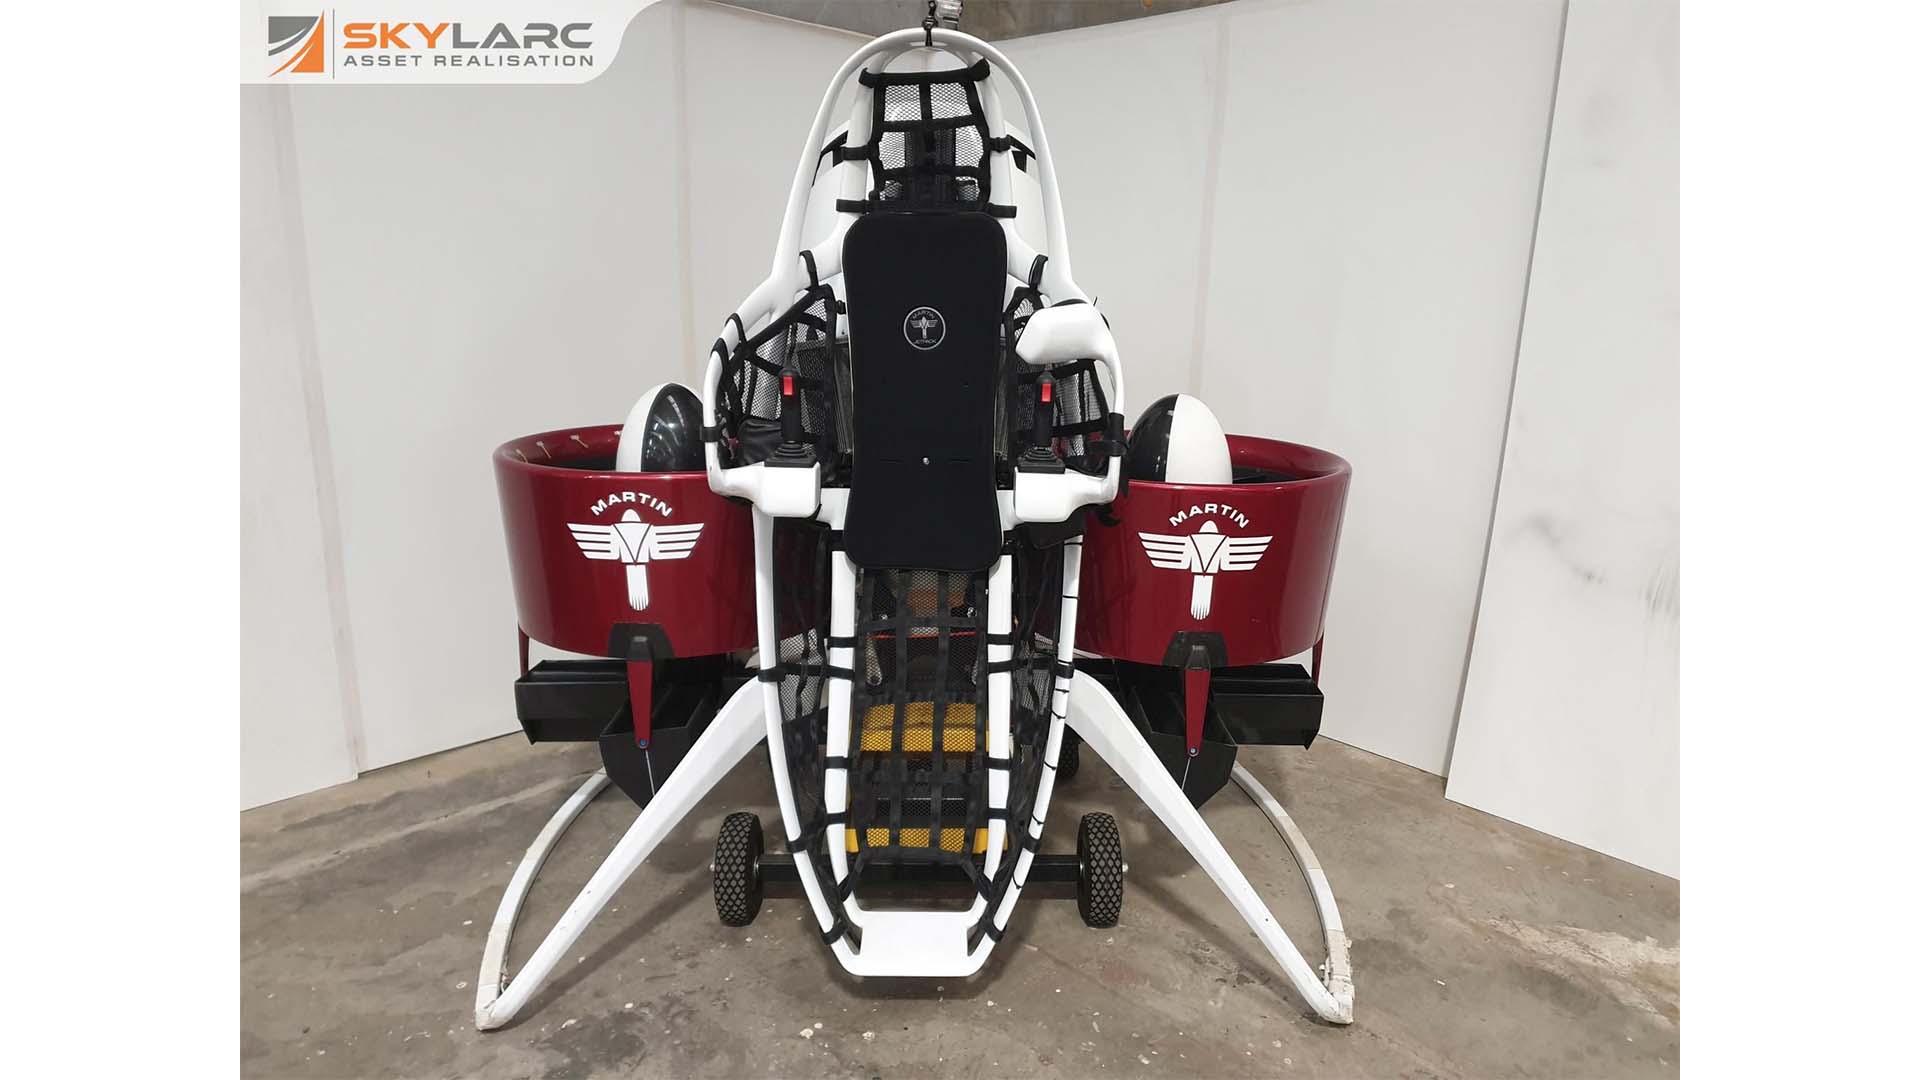 A futuristic Martin Jetpack Model P12 ZK-JMK, viewed 84,549 times, sold on Trade Me.